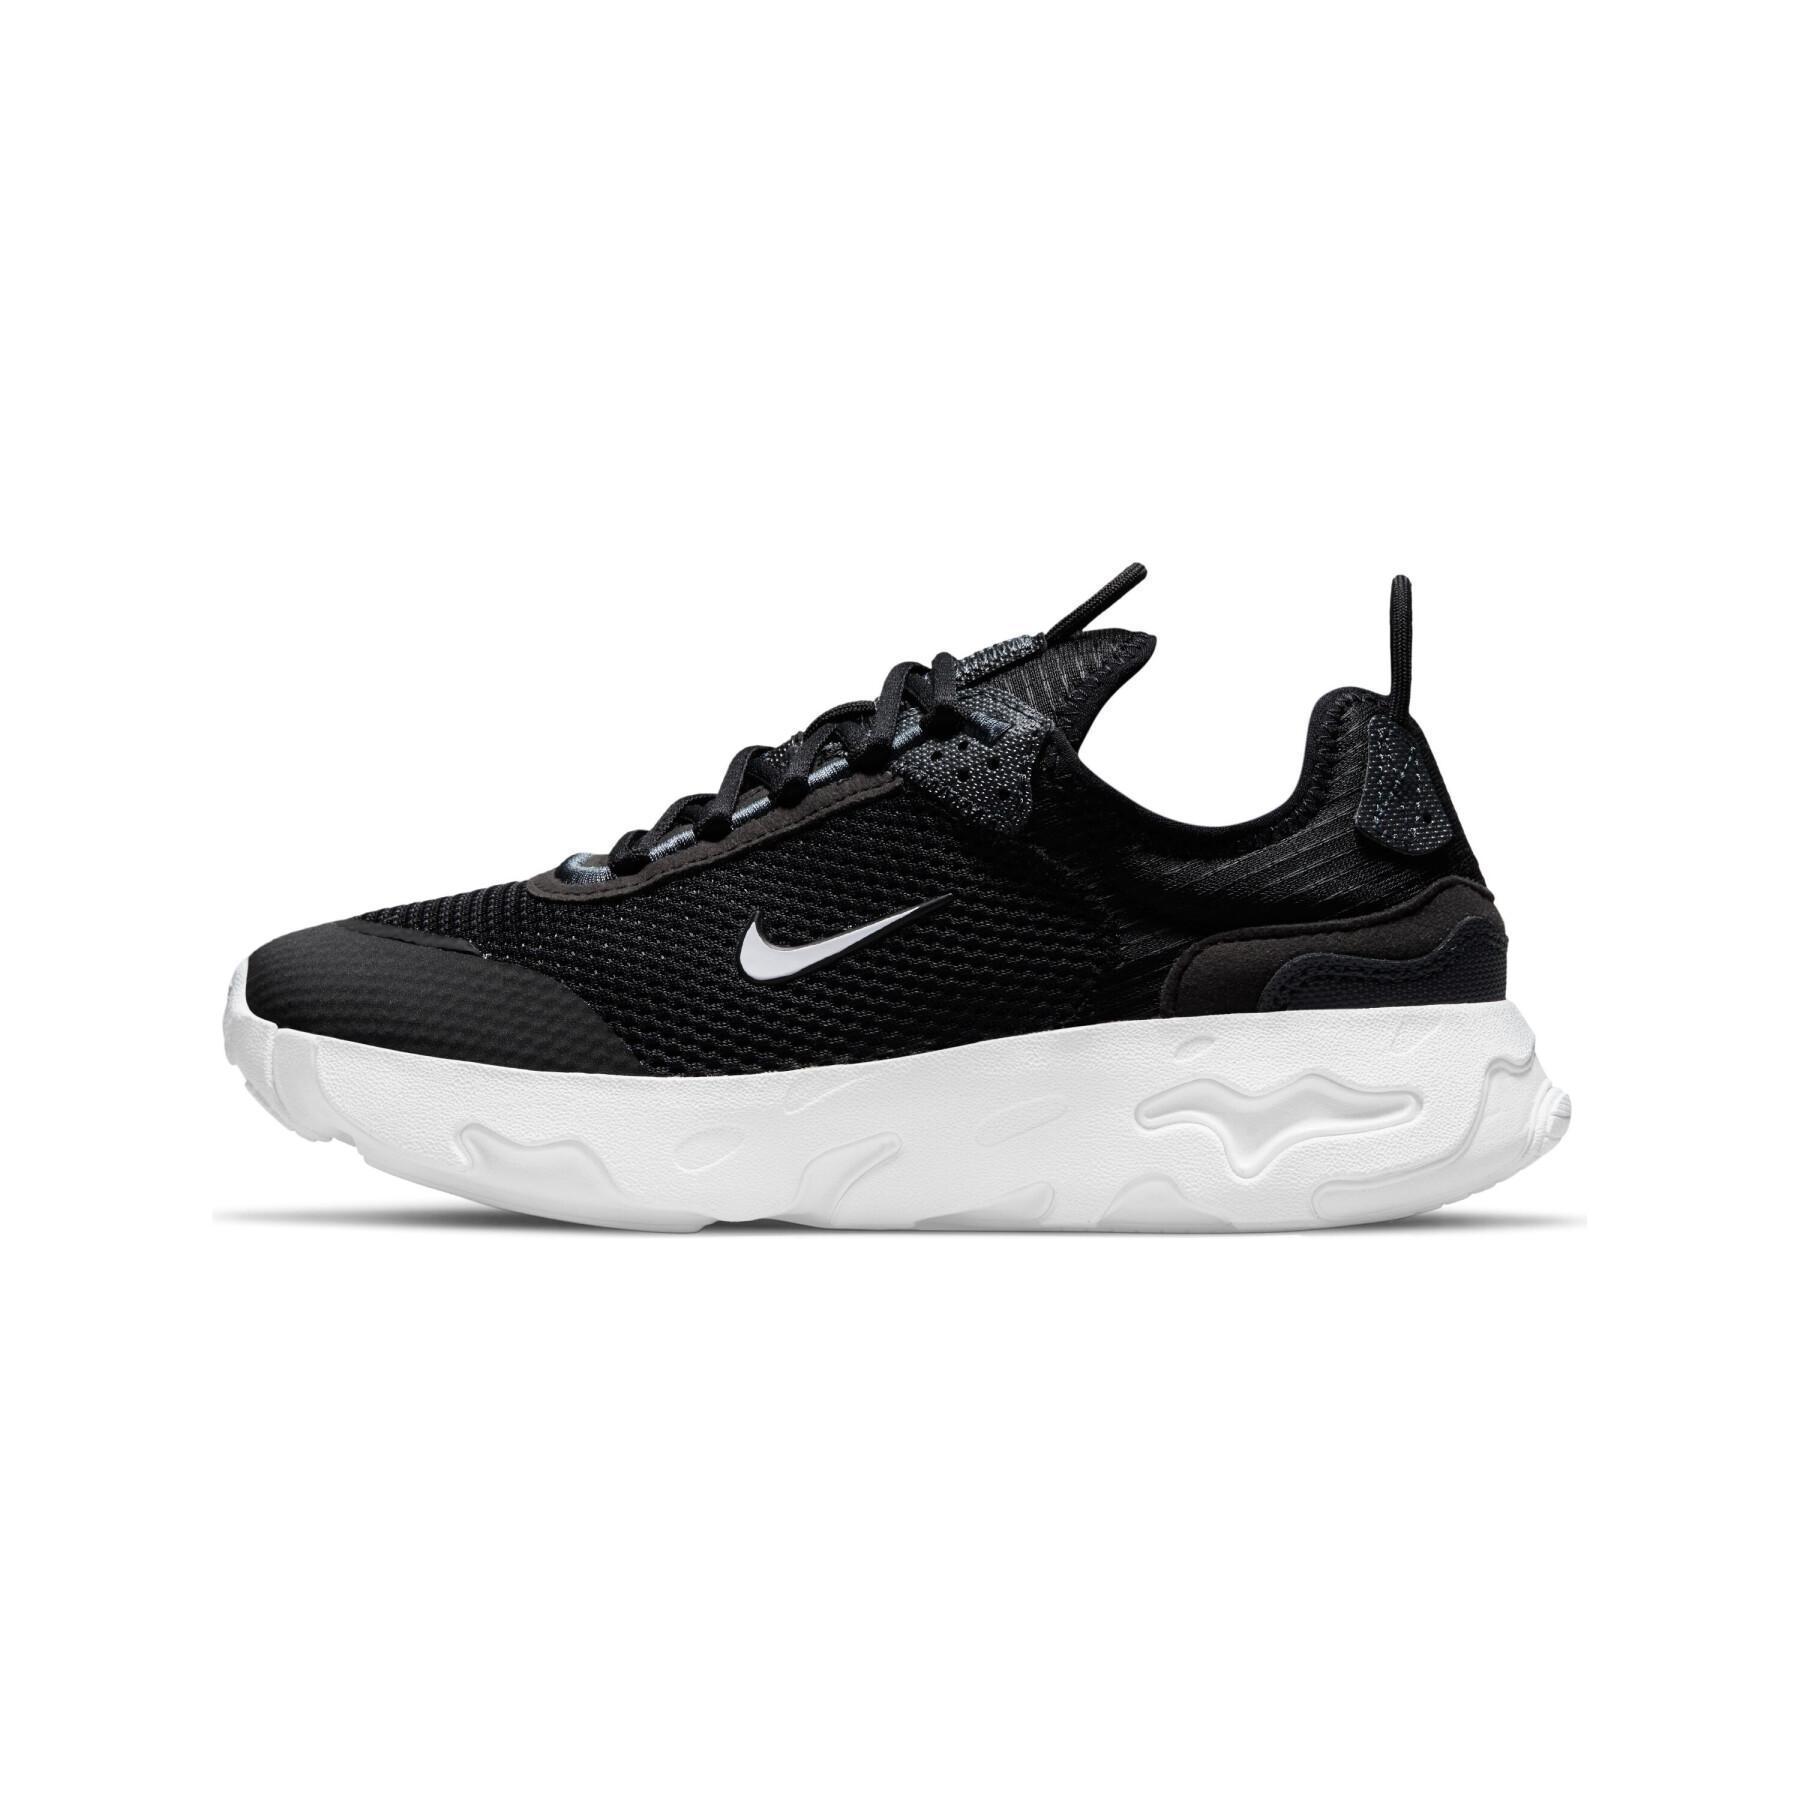 Children's shoes Nike React Live